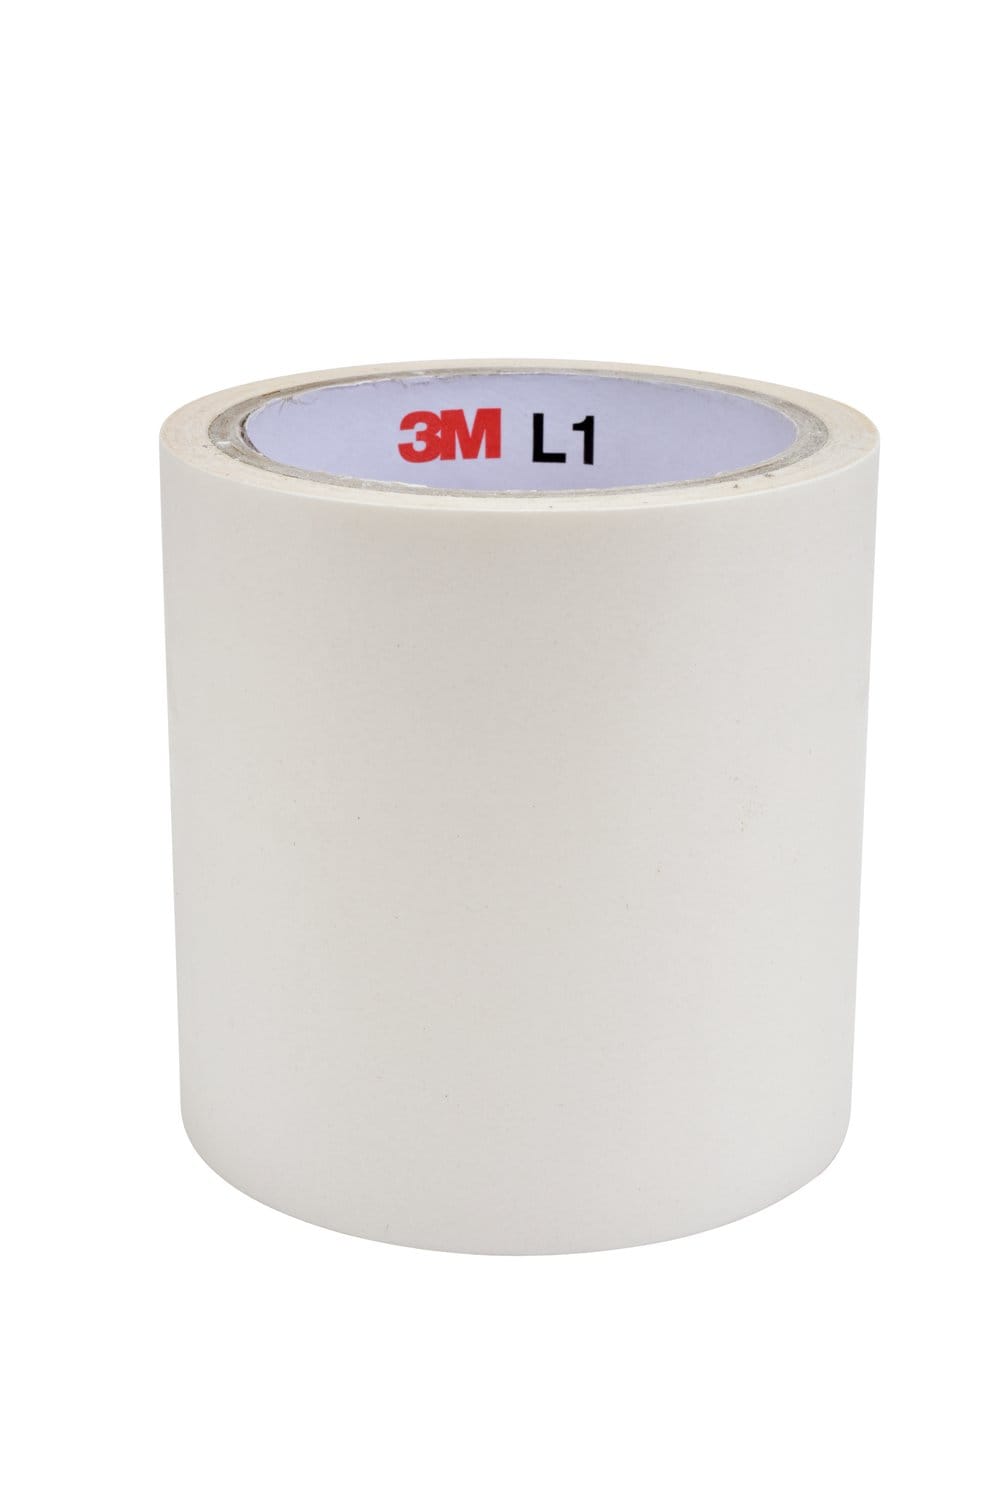 7100090728 - 3M Double Coated Adhesive Tape L1+DCP, Clear, 100 mm x 10 m, 0.09 mm, 2
rolls per case, Sample